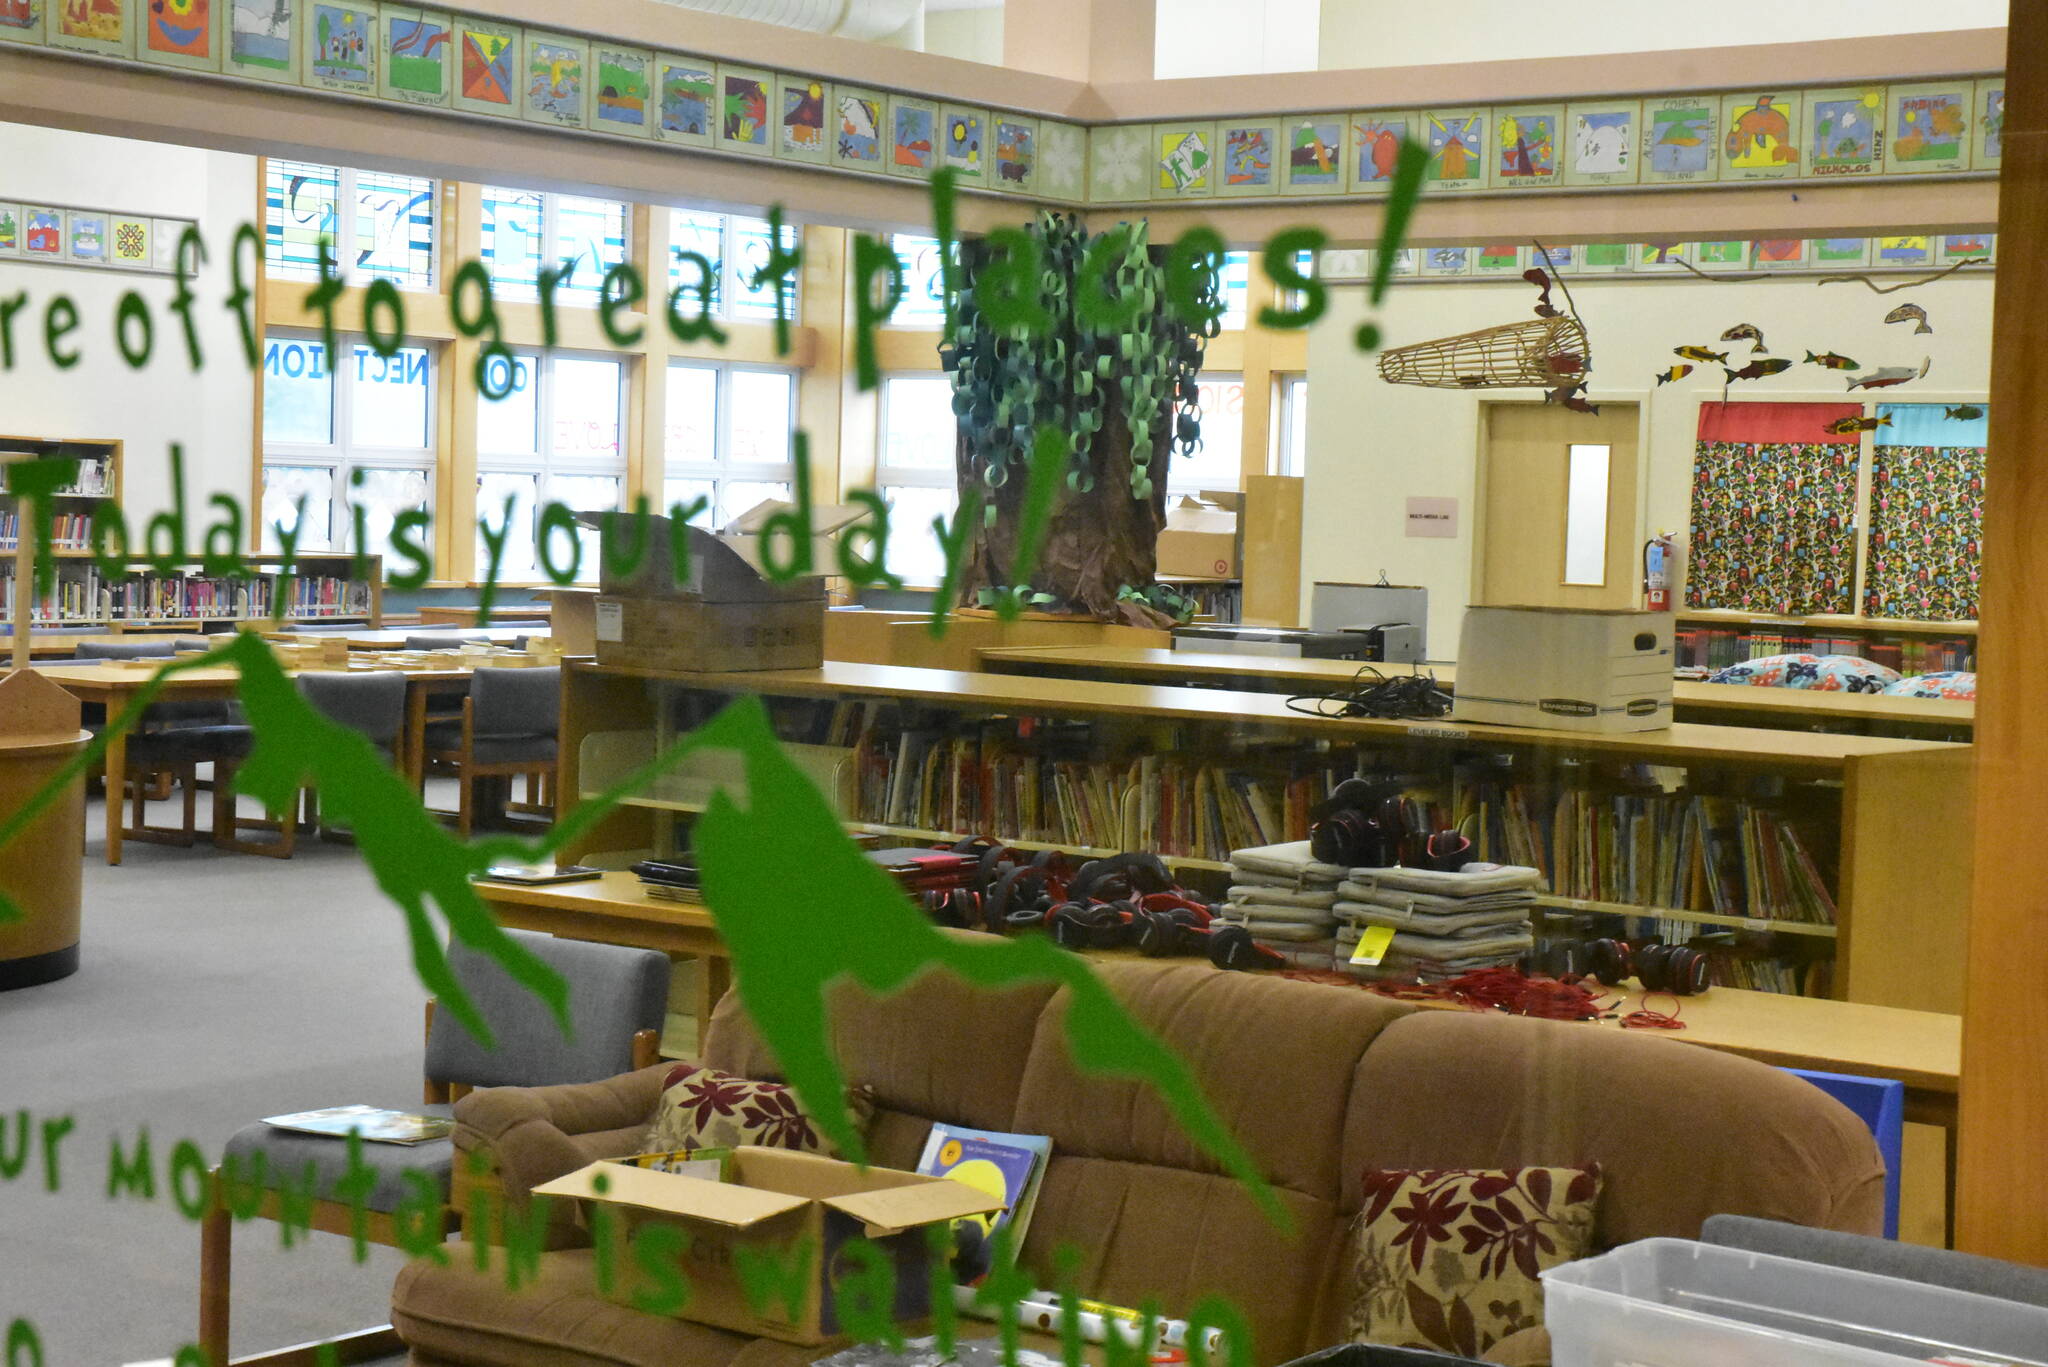 This Aug. 21, 2020 photo shows the interior of Riverbend Elementary School, which suffered severe damage after two water pipes burst following extreme cold in Juneau. The Juneau School District announced Thursday the school would remain closed until at least next week. (Peter Segall / Juneau Empire file)